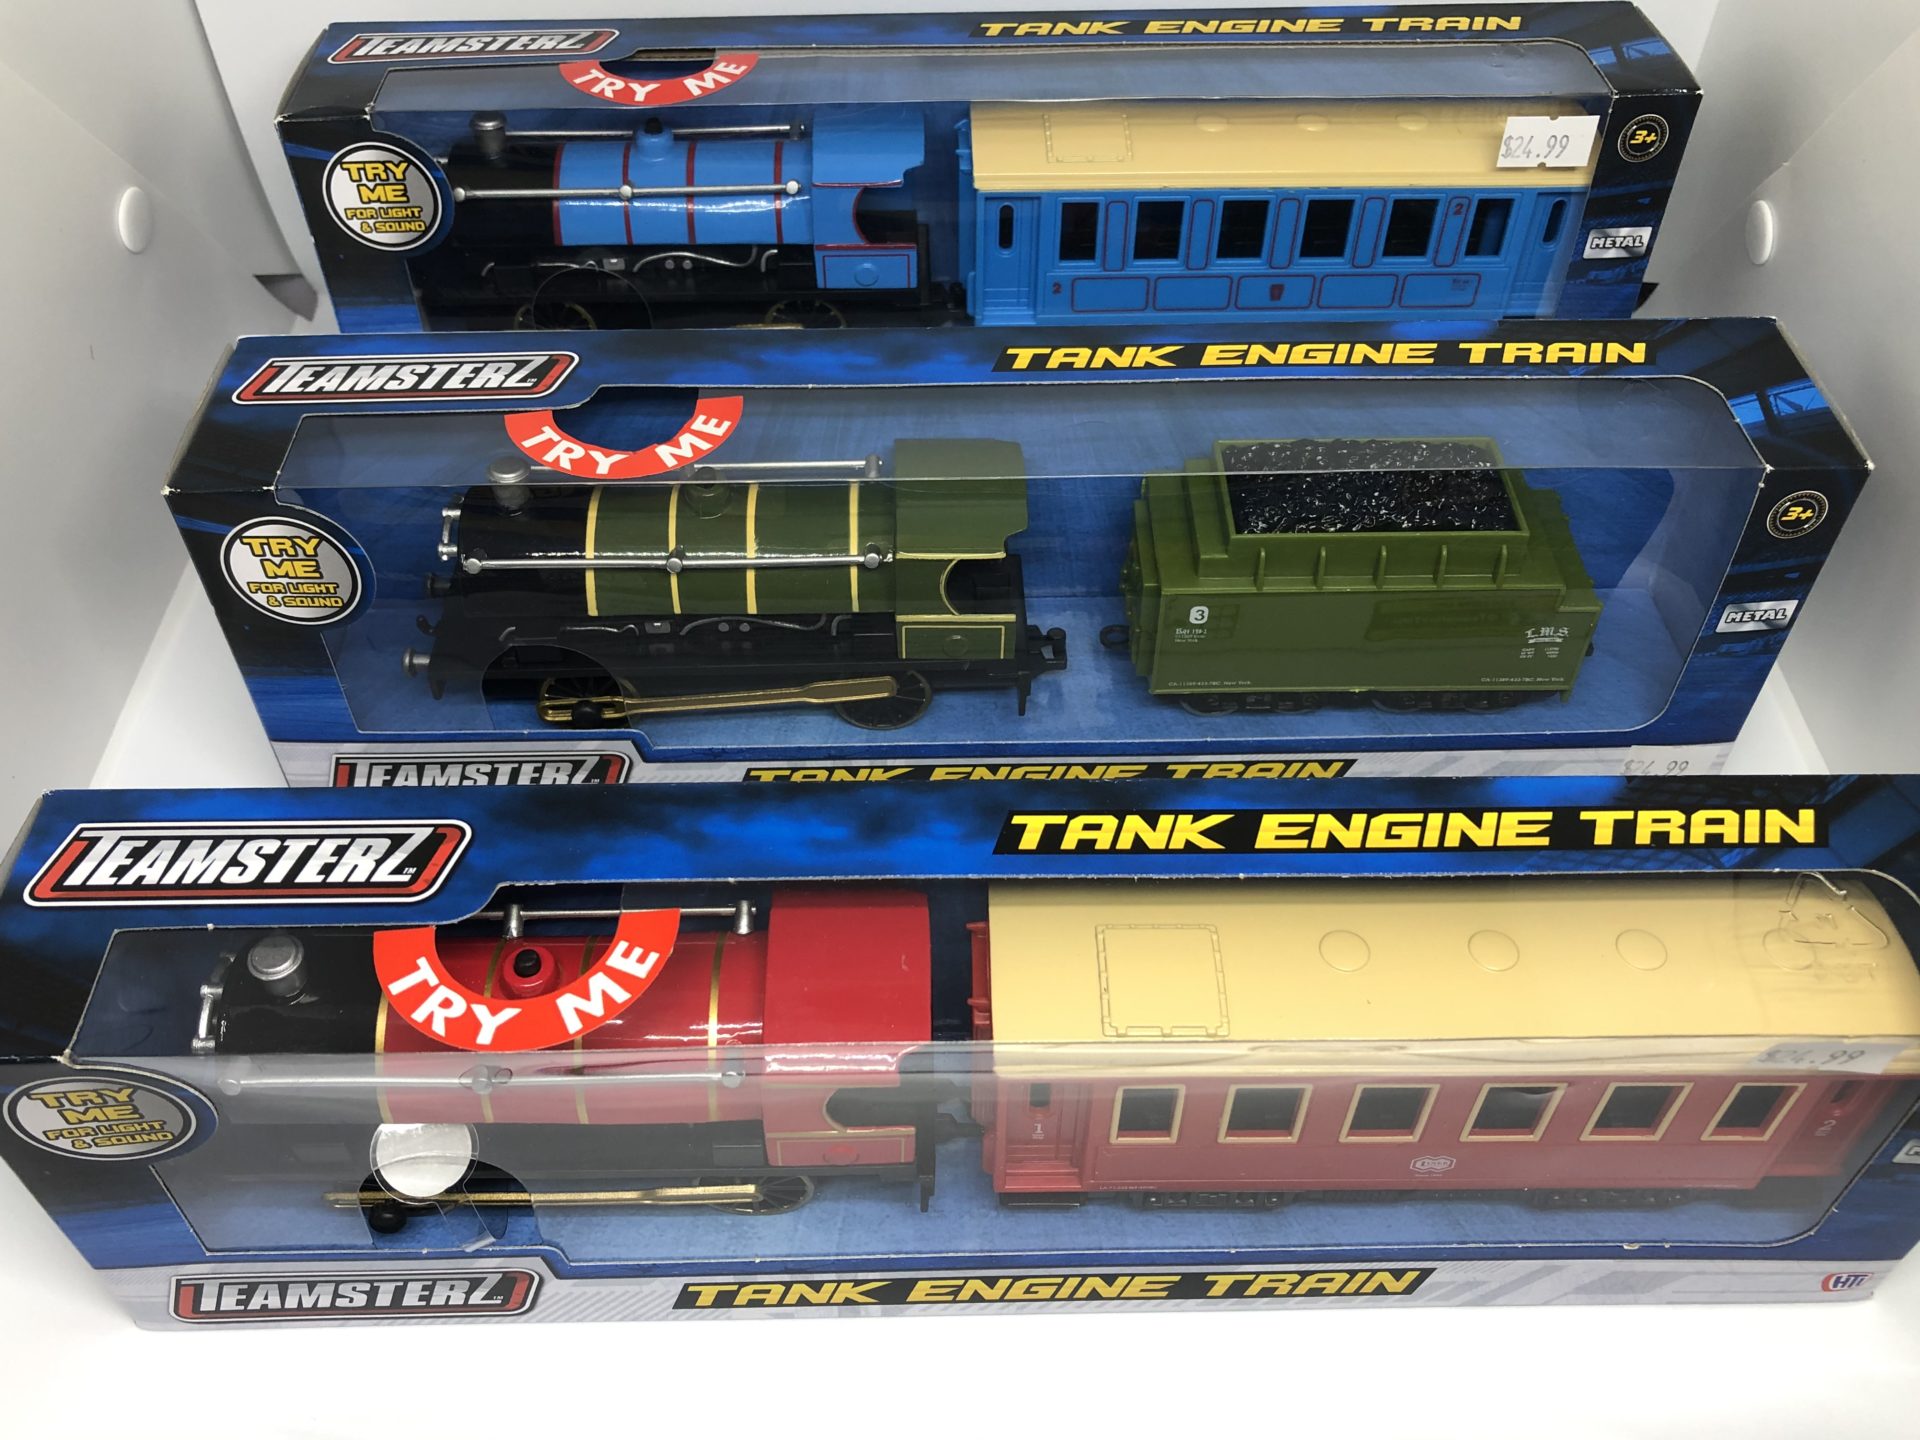 TEAMSTERS DIECAST TANK ENGINE STEAM TRAIN with SOUND & LIGHTS toy tank engine 